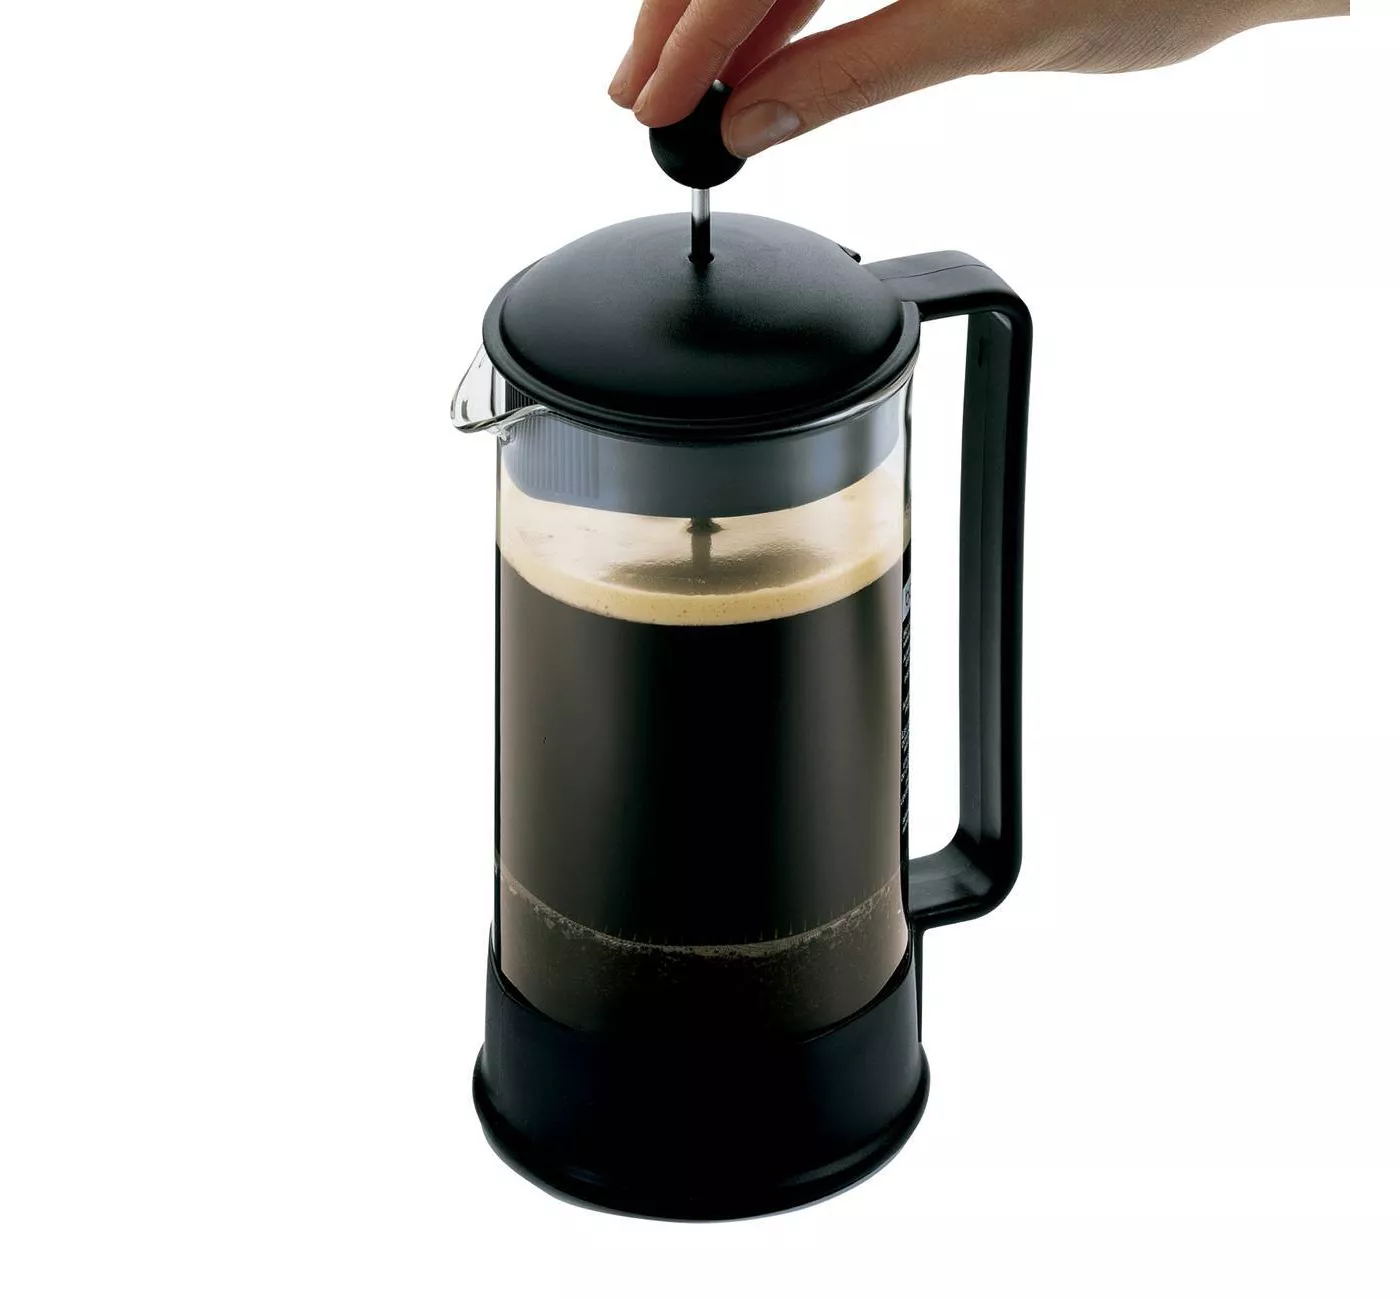 Bodum Brazil 8 Cup French Press Coffee Maker - Black - image 2 of 4